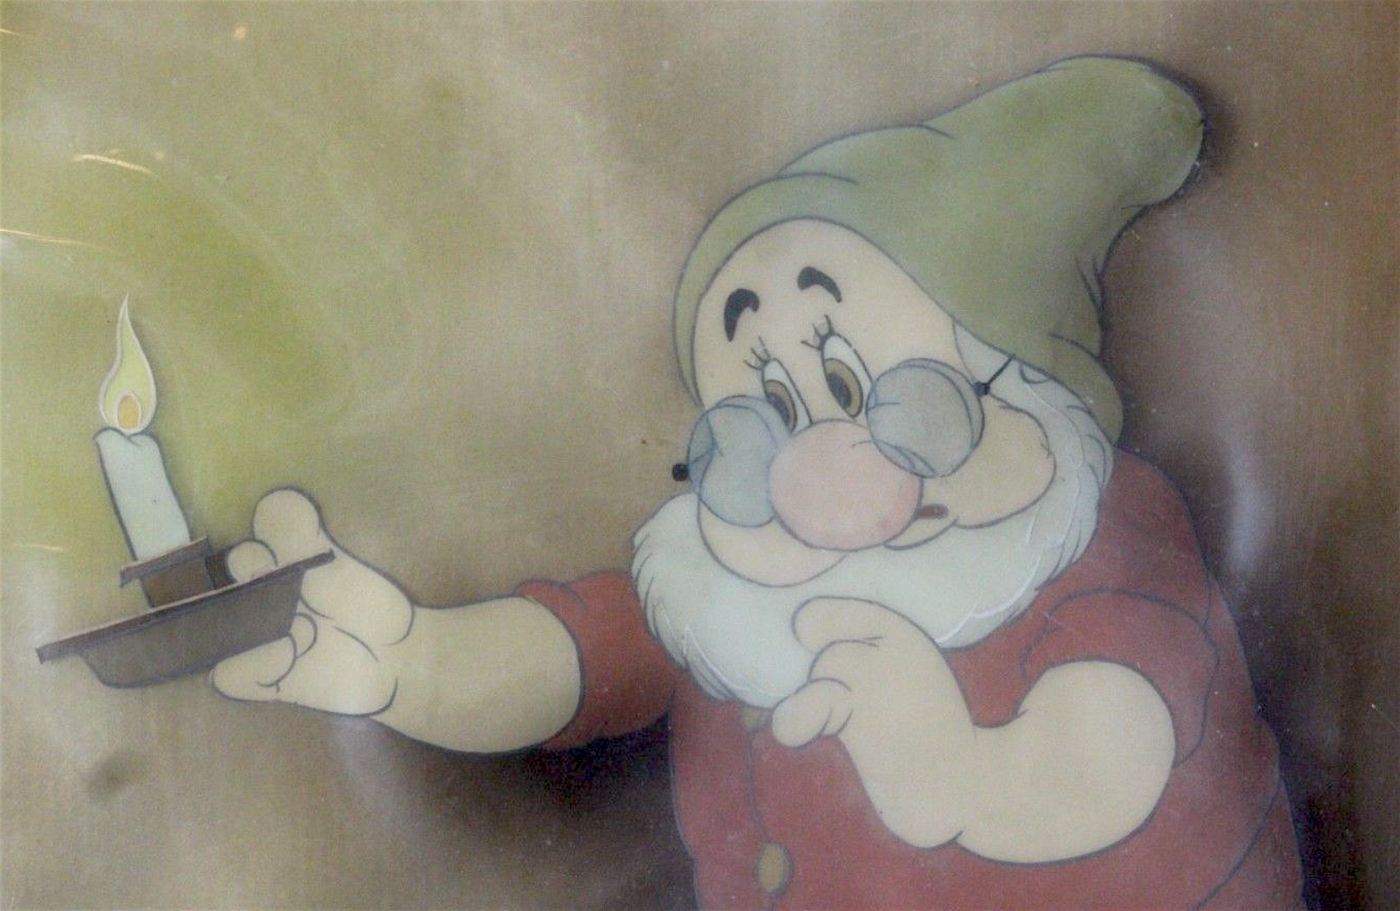 Walt Disney Production Cel Featuring Doc from Snow White and the Seven Dwarfs